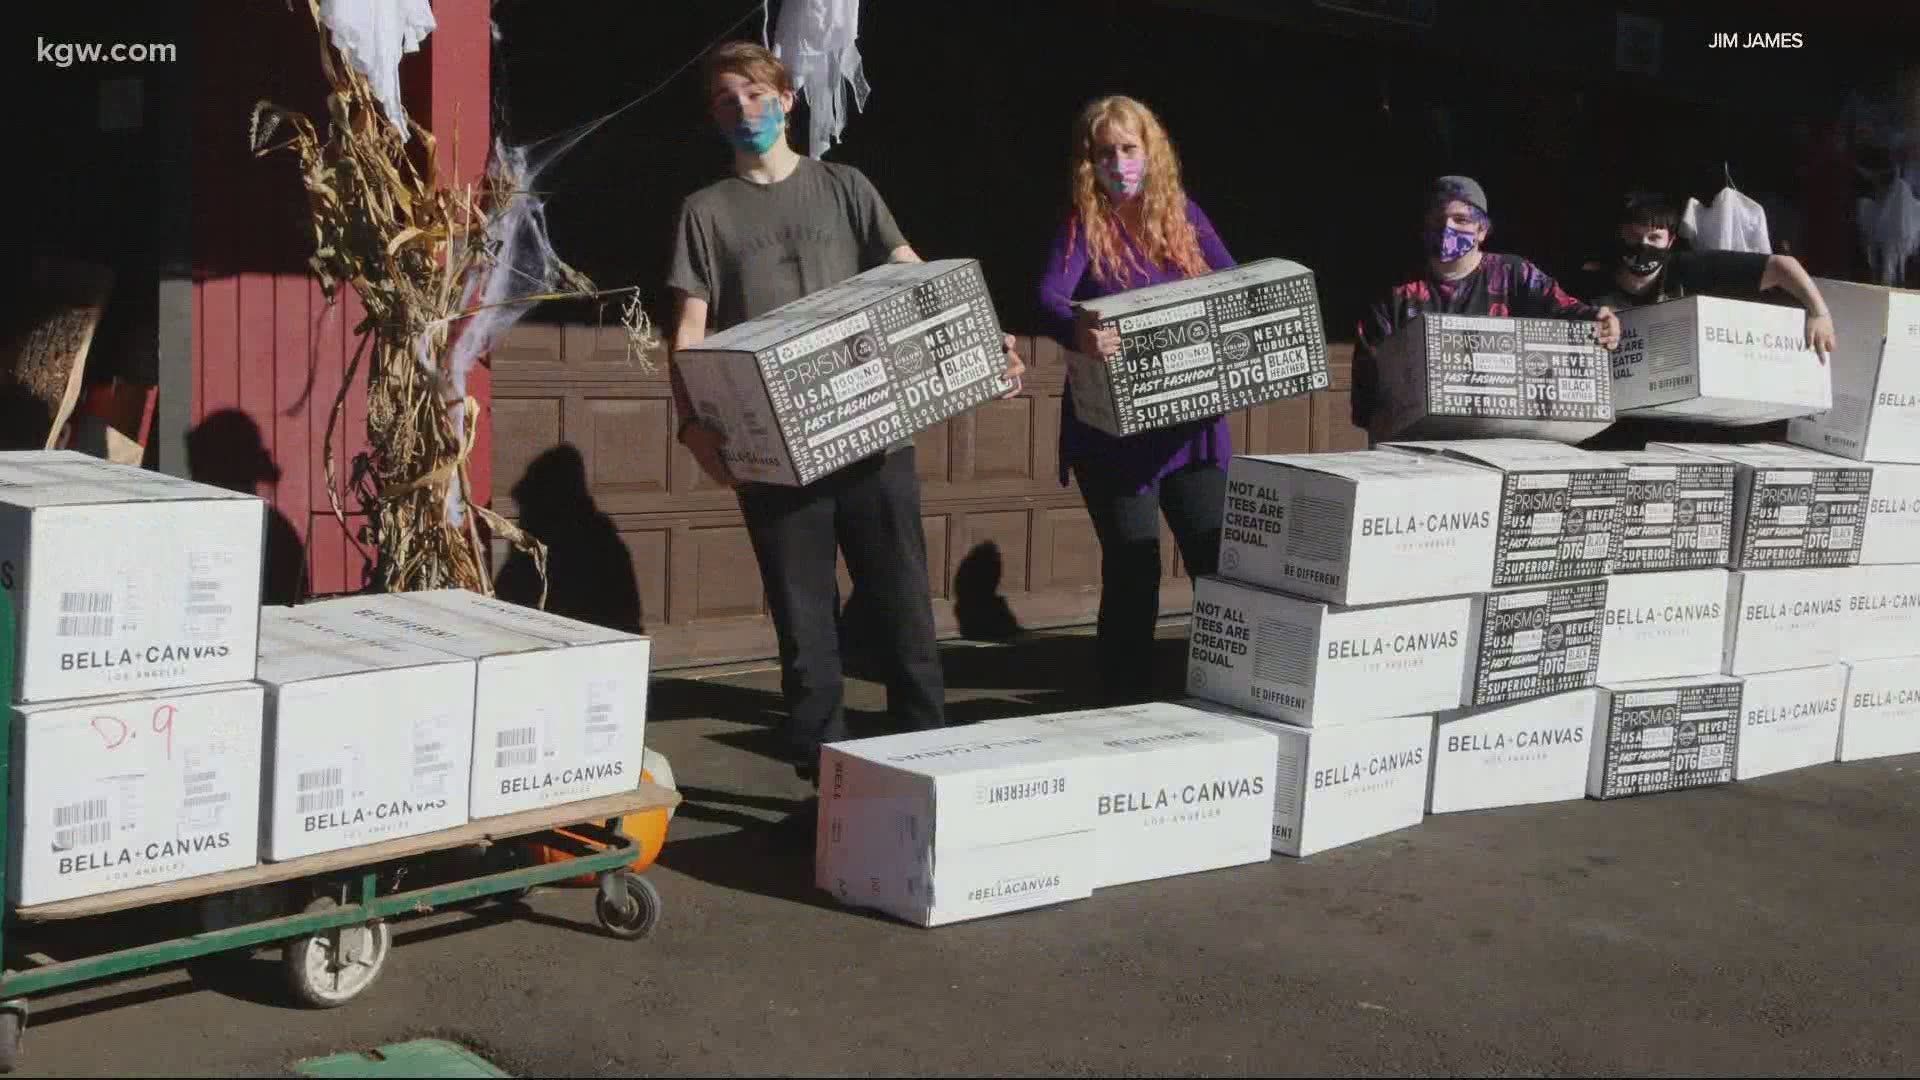 A Portland couple who wanted to provide face masks to those who need them just got a donation of 50,000 masks.